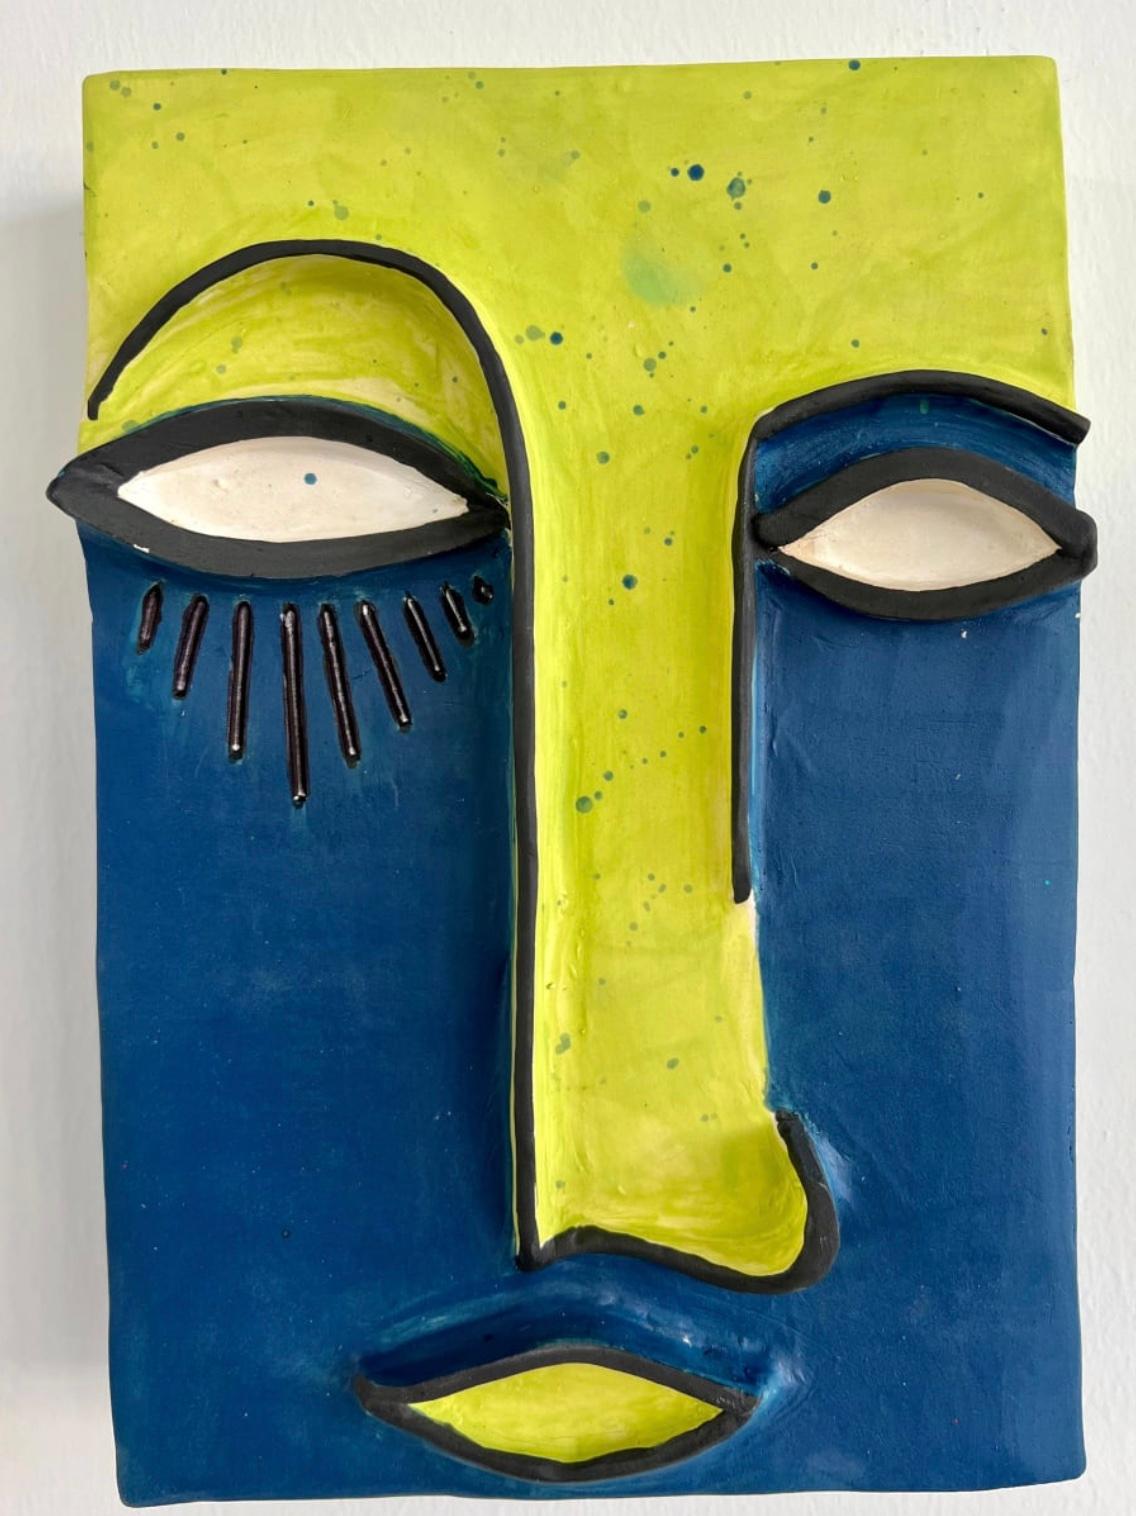 Clay mask with a face outline painted in lime green and dark blue with black lines. 

Unique one of a kind painting signed by the artist. 

ARTIST BIO 
Alice Mizrachi is a New York based interdisciplinary artist and educator working in the mediums